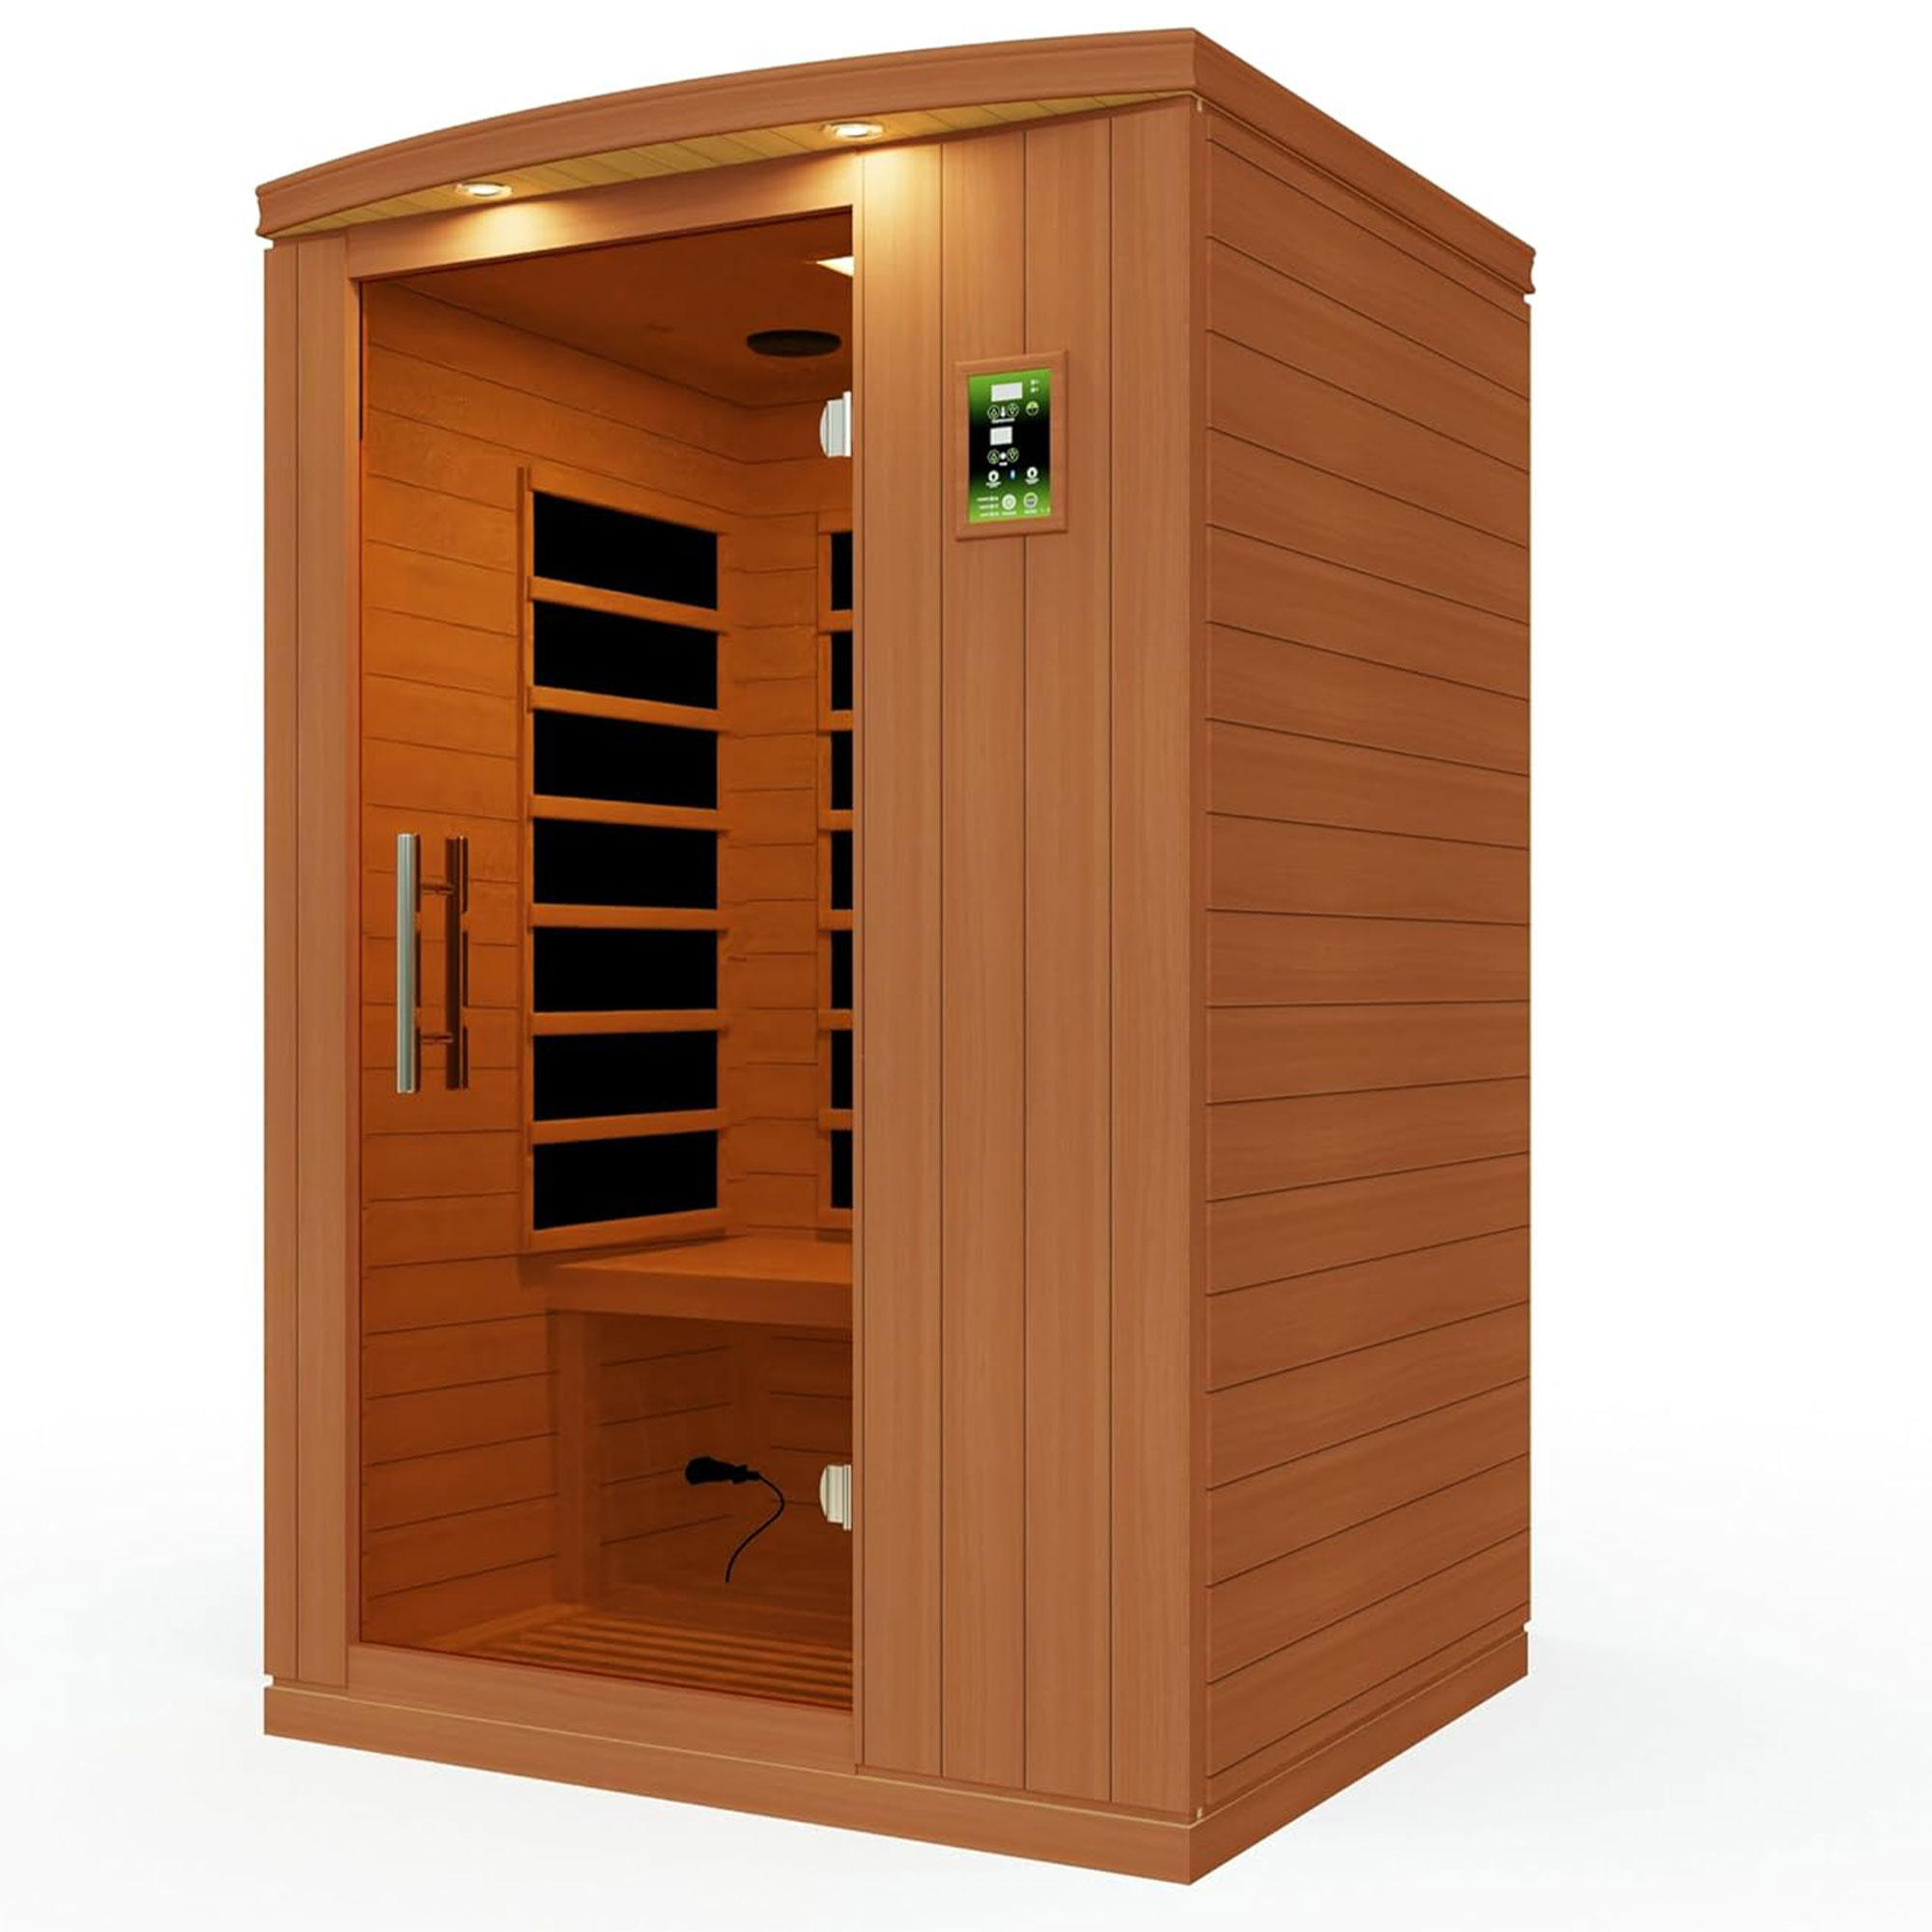 Dynamic Saunas Venice Elite 2 Person Low EMF Infrared Therapy Home Sauna - image 1 of 6